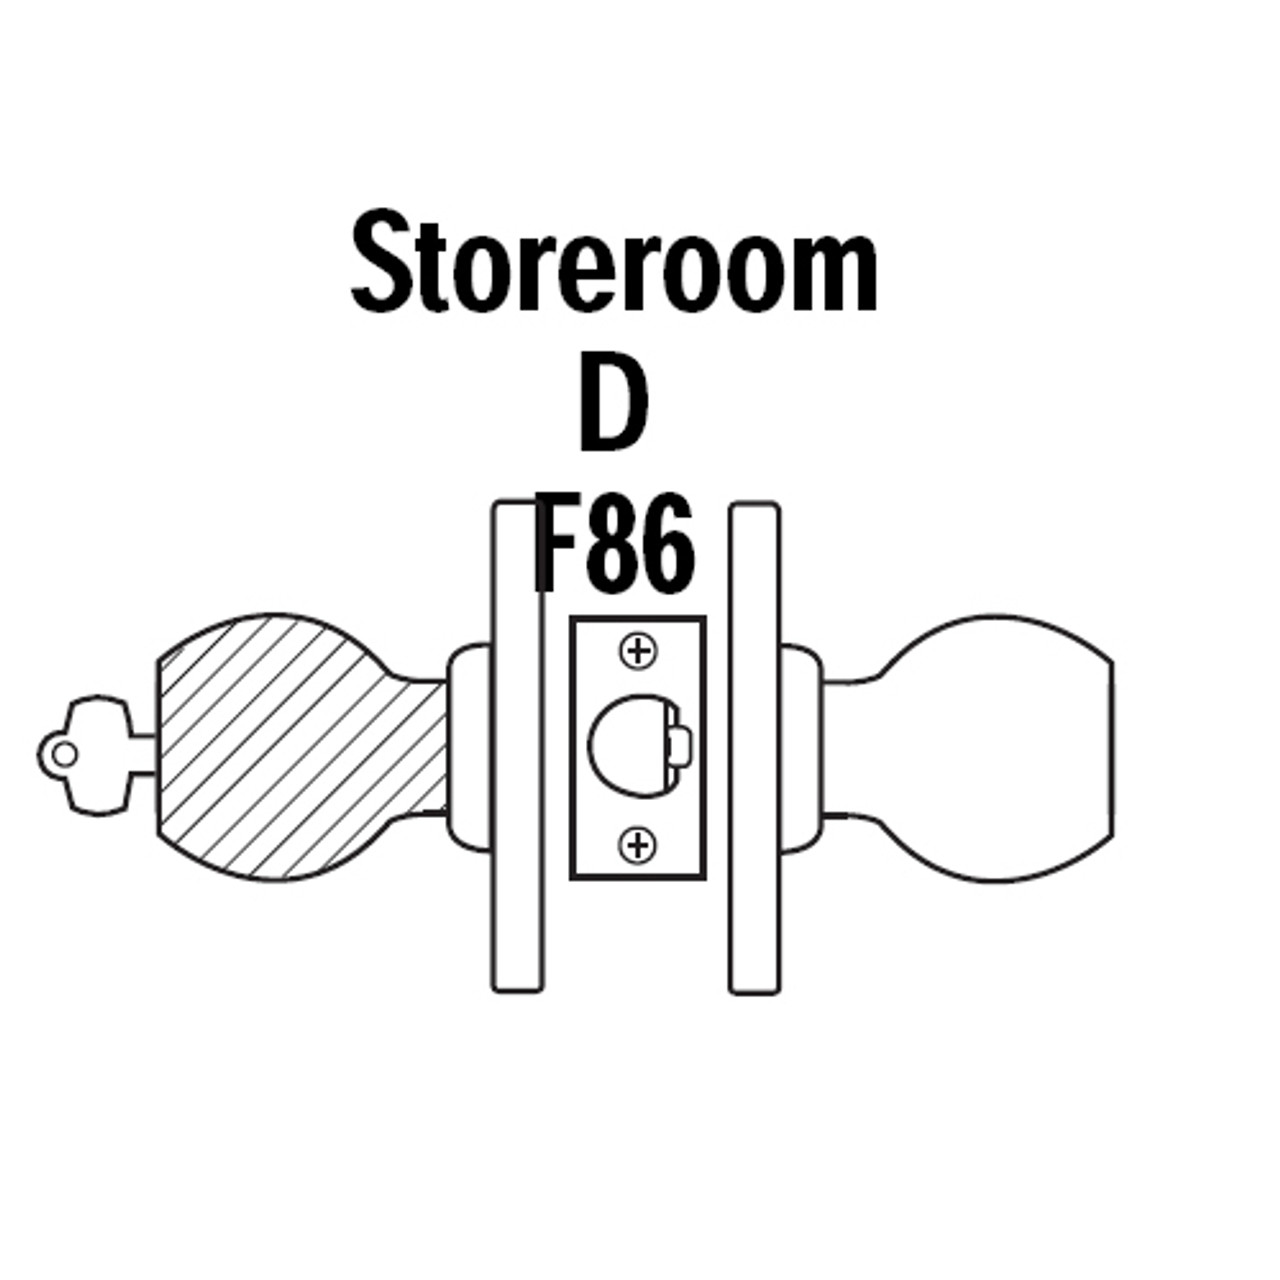 8K57D4AS3625 Best 8K Series Storeroom Heavy Duty Cylindrical Knob Locks with Round Style in Bright Chrome